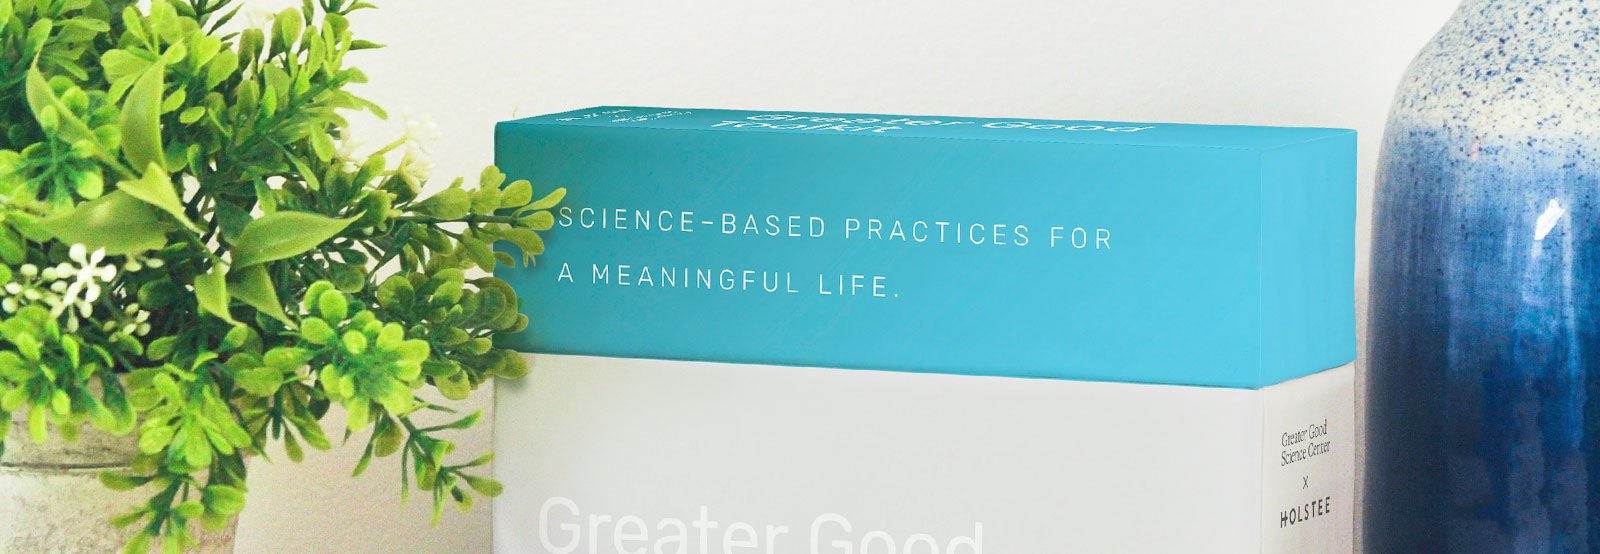 Greater Good Toolkit | Finding Meaning in Collaboration with Greater Good Science Center